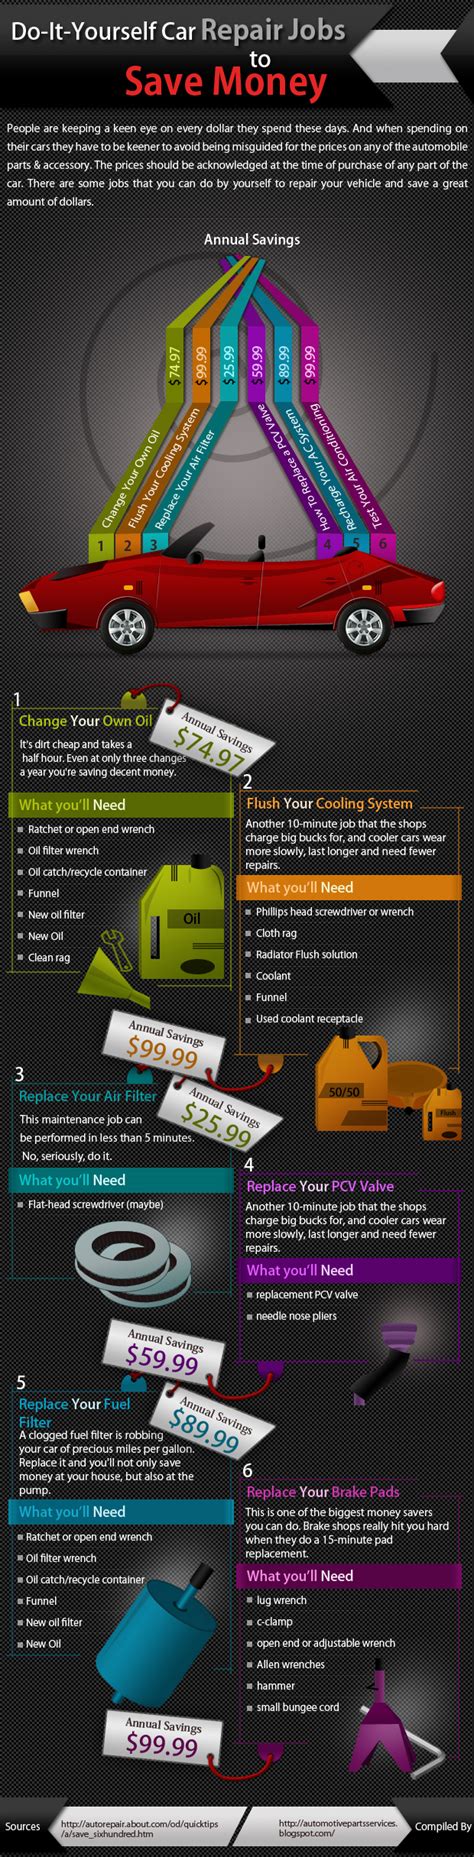 The Daily Infographic Do It Yourself Car Repair Jobs To Save Money